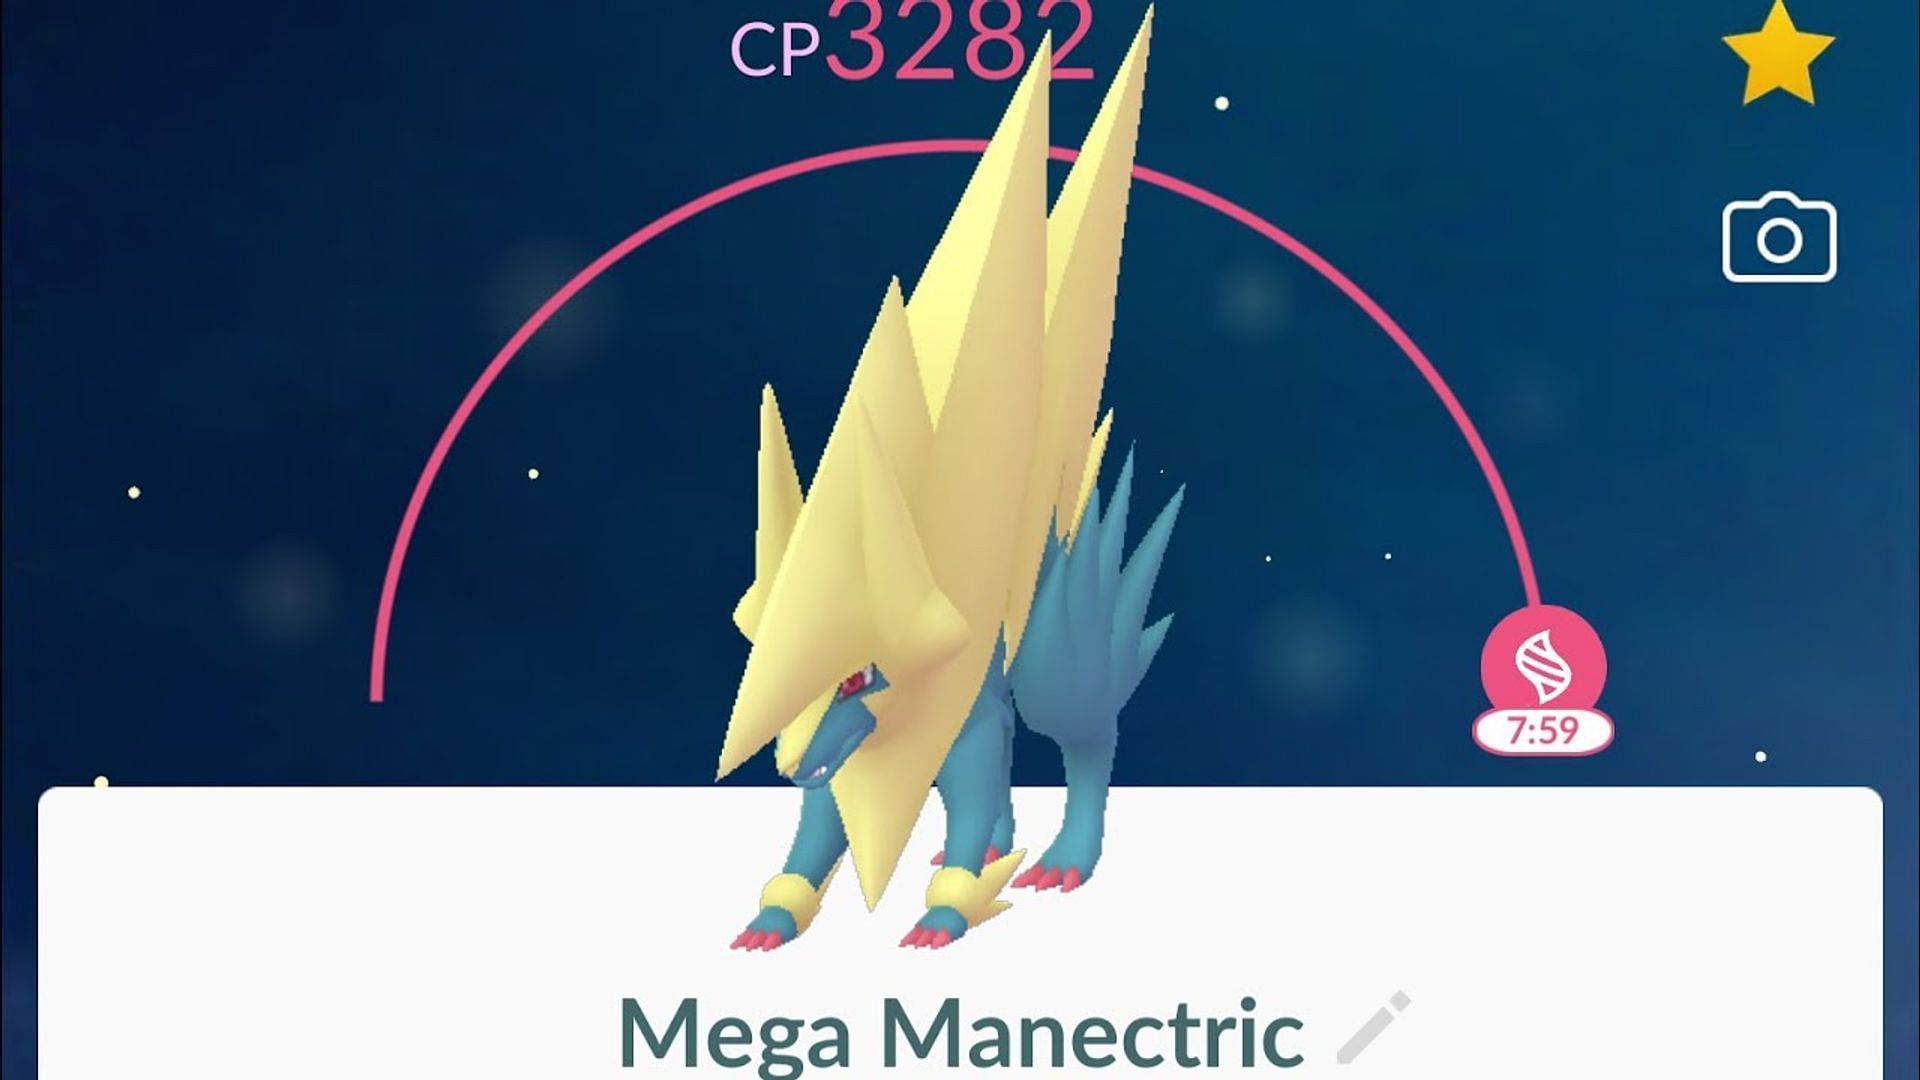 Mega Manectric as it appears on its in-game status screen in Pokemon GO (Image via Niantic)